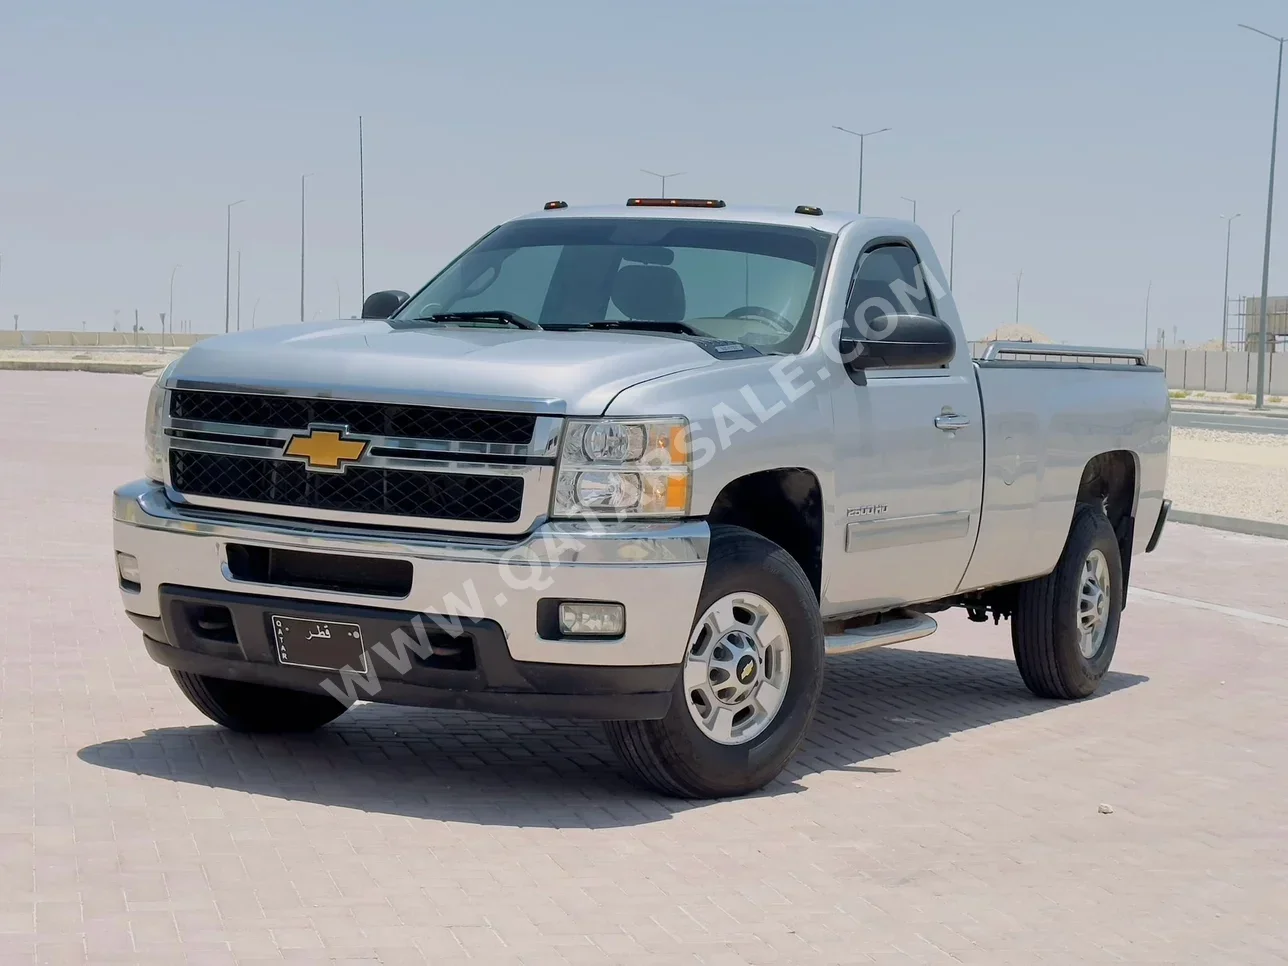 Chevrolet  Silverado  2500 HD  2014  Automatic  243,000 Km  8 Cylinder  Four Wheel Drive (4WD)  Pick Up  Gray